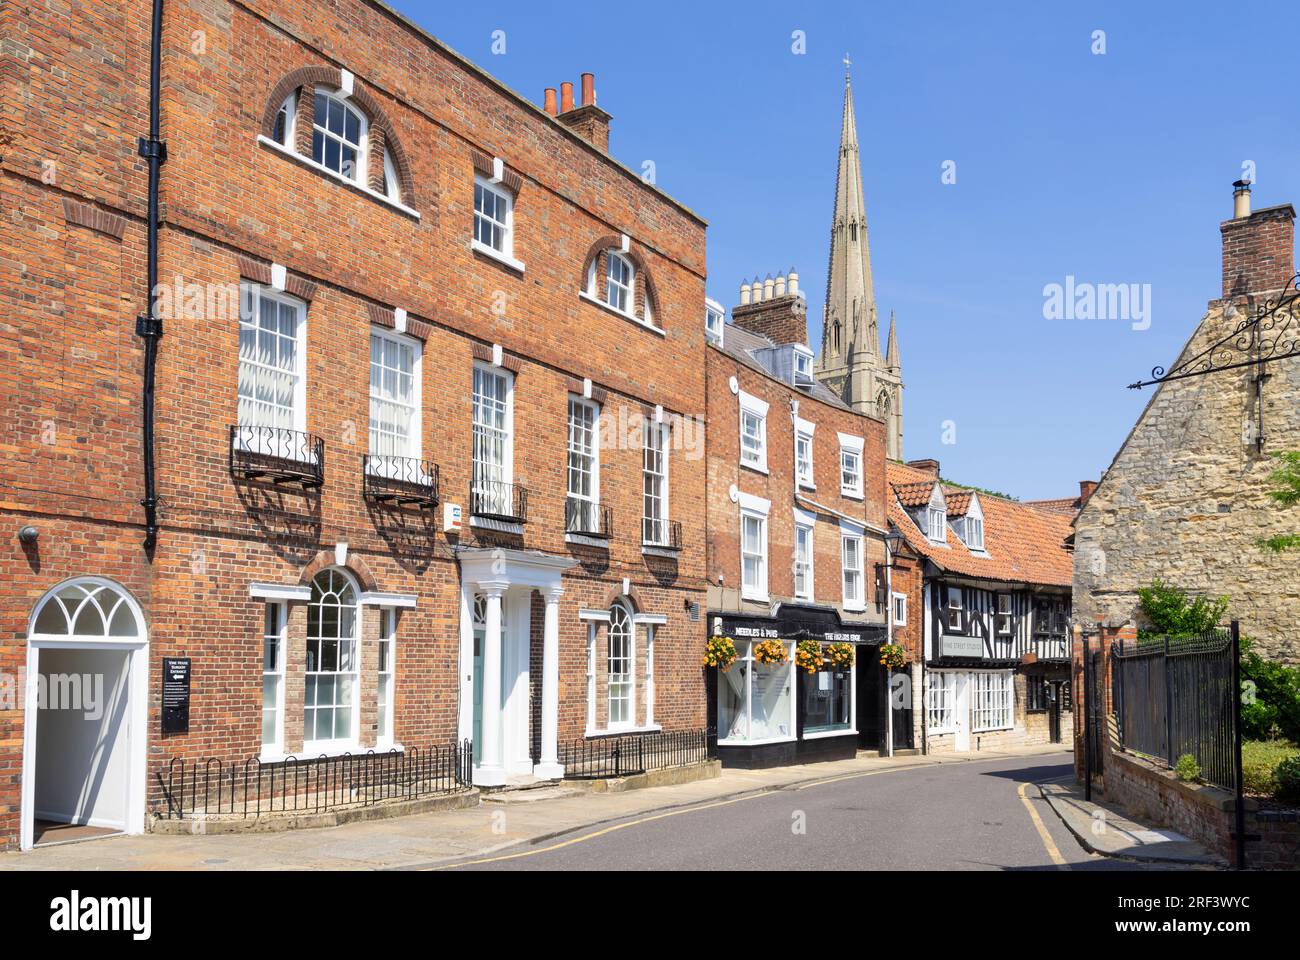 Grantham Vine street Grantham with The Blue Pig pub and view of St Wulframs Church spire Grantham South Kesteven Lincolnshire England UK GB Europe Stock Photo